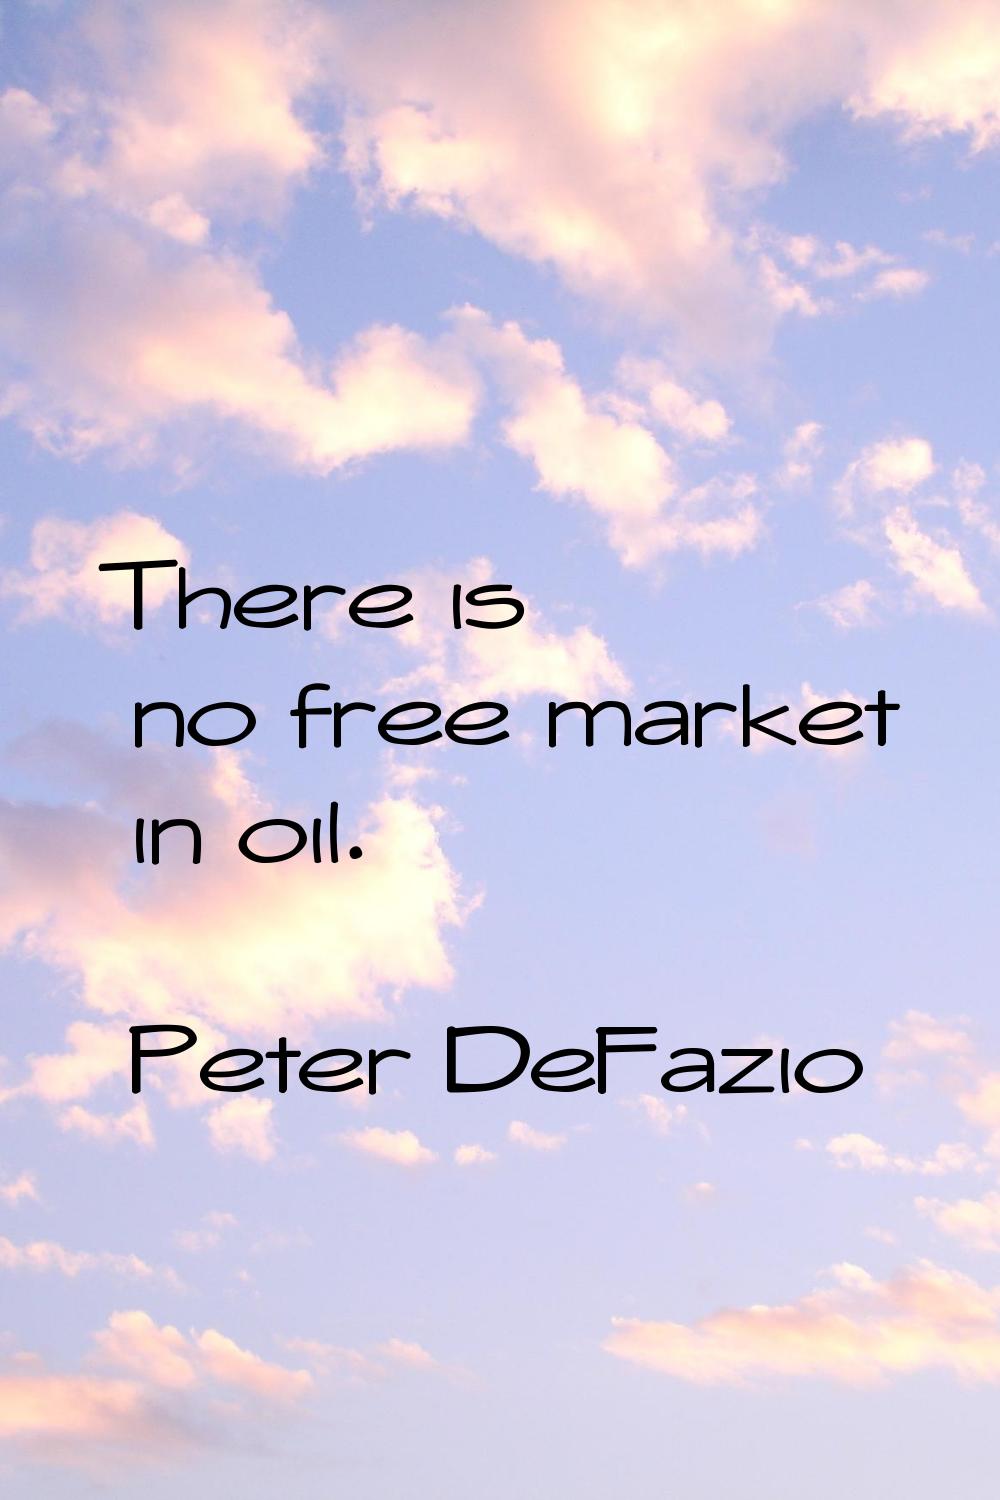 There is no free market in oil.